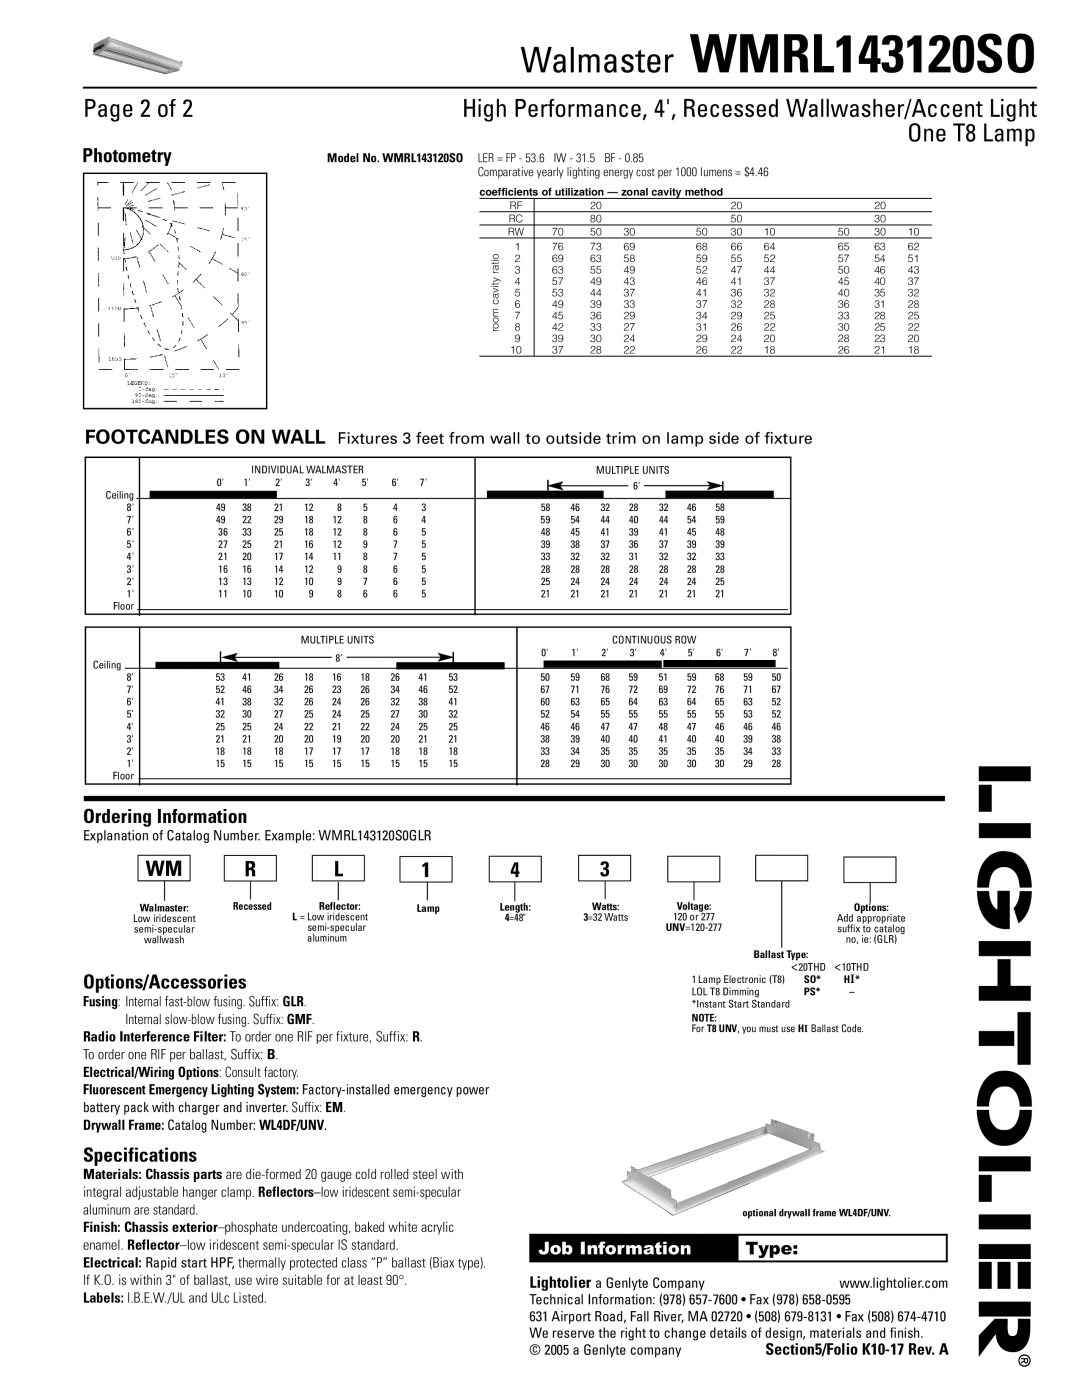 Lightolier WMRL143120SO Page 2 of, Photometry, Ordering Information, Options/Accessories, Specifications, One T8 Lamp 